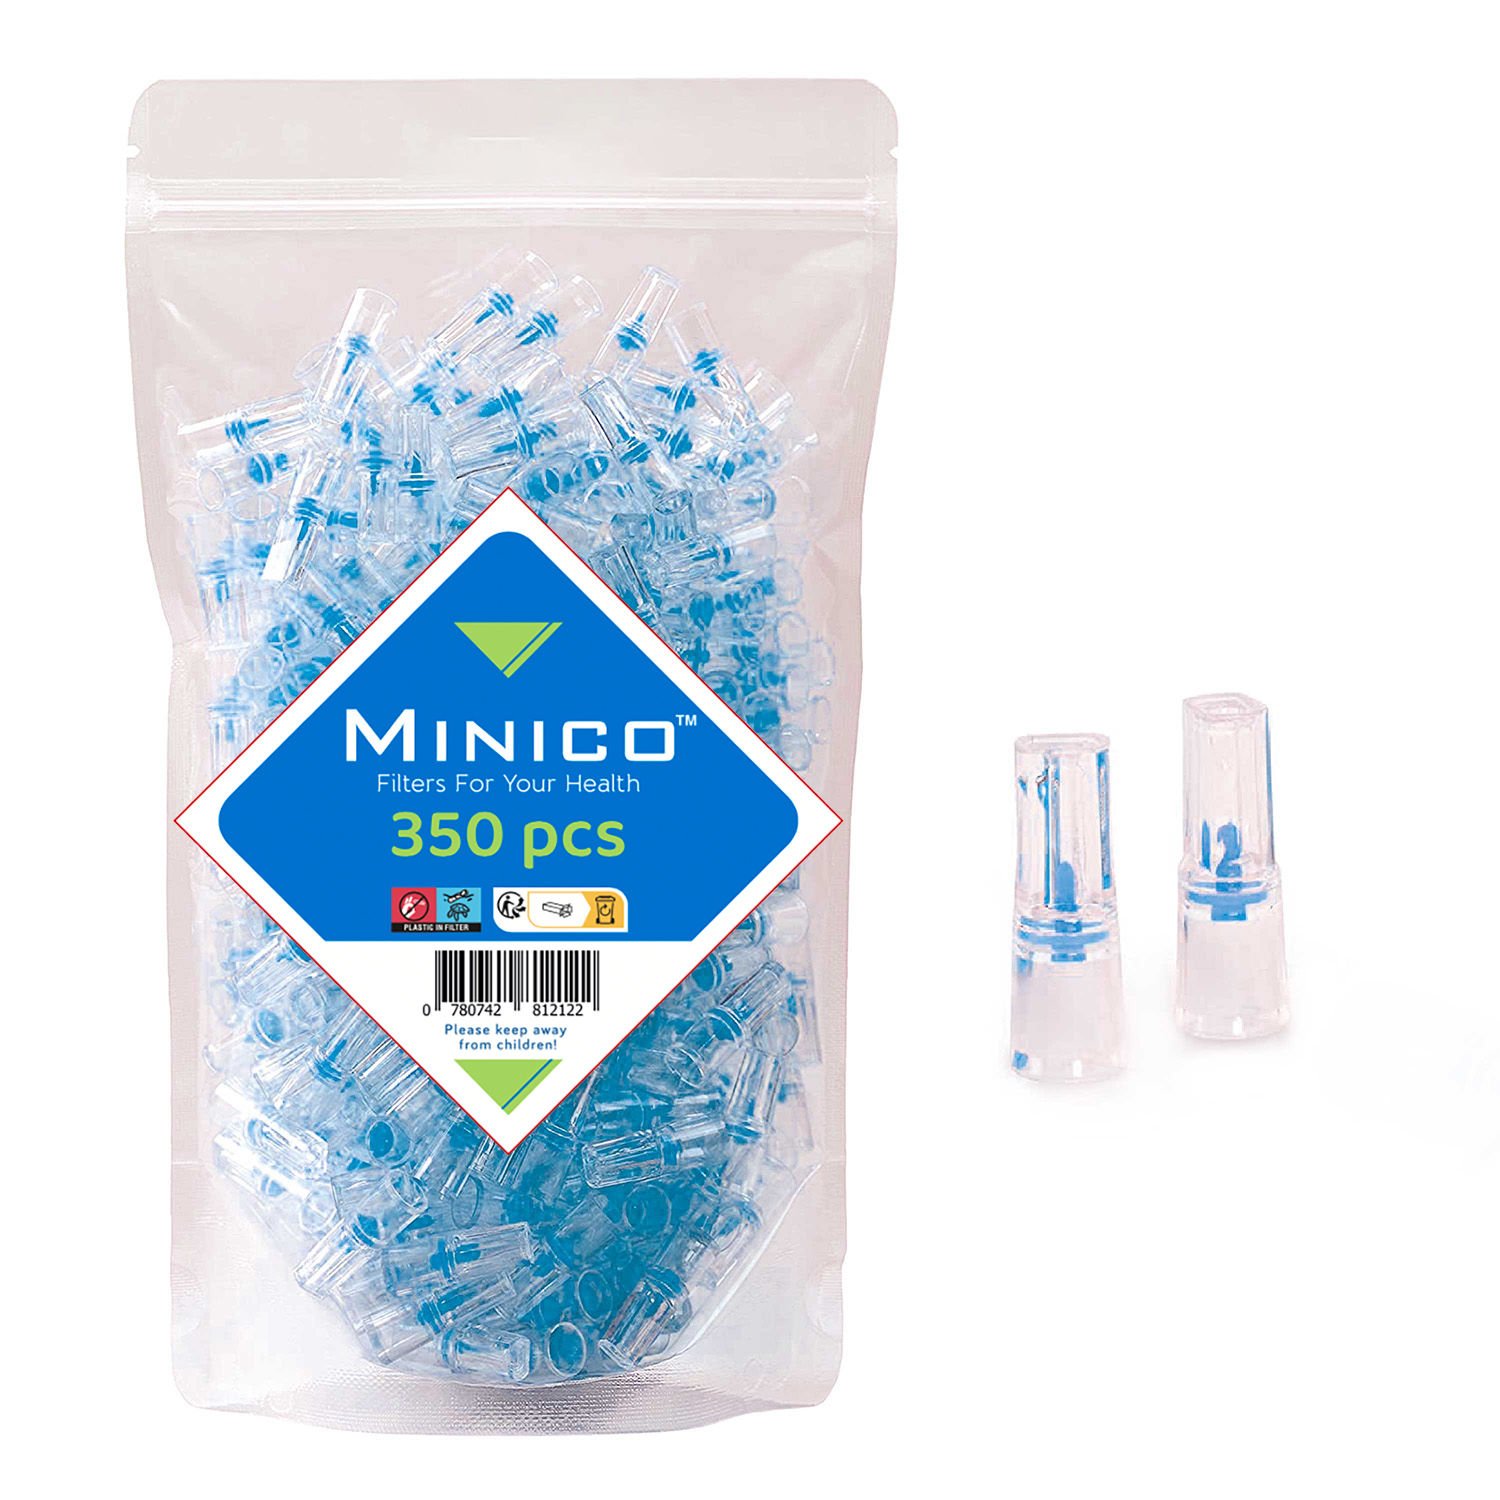 MINICO Disposable Cigarette Filters for Smokers (350 Pieces)